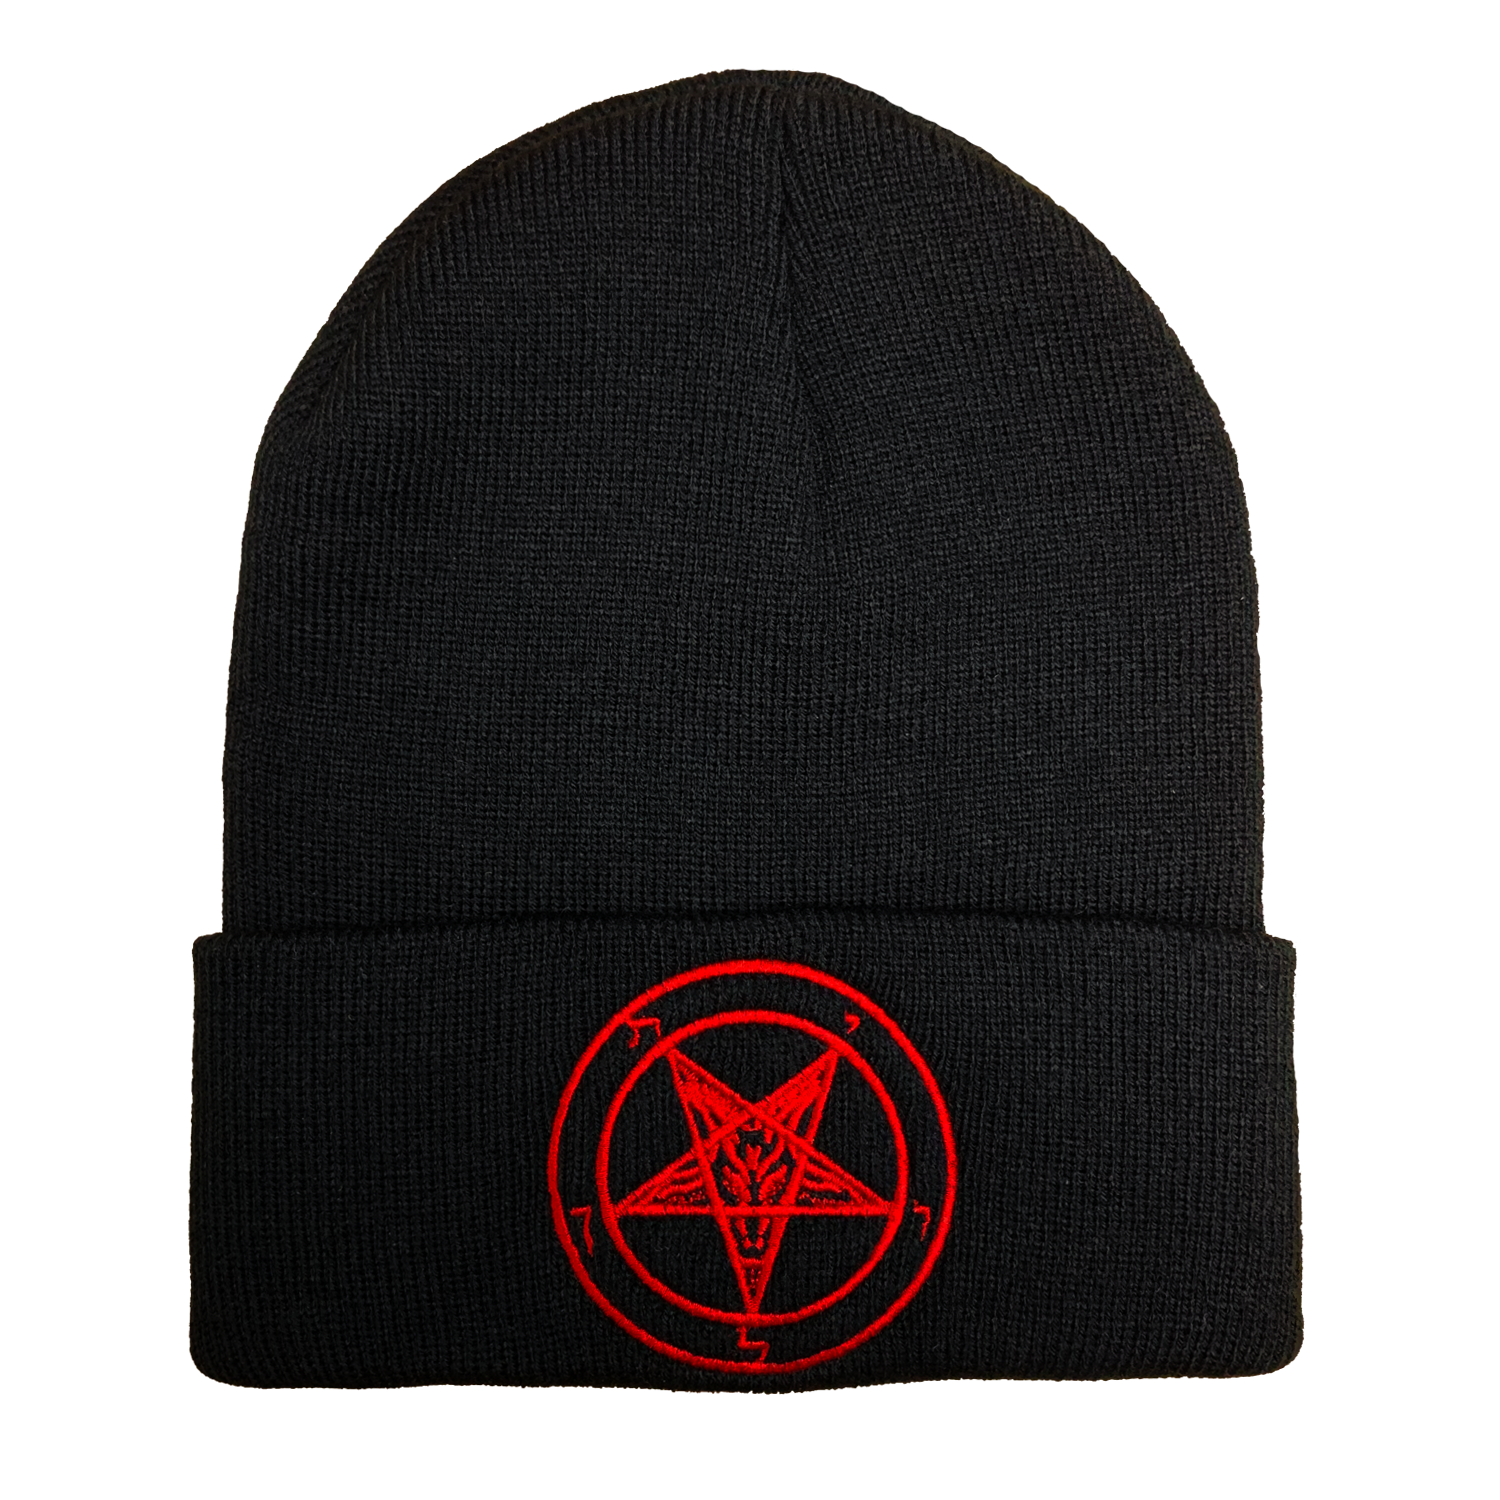 Pentagram Embroidered Beanie - UNMASKED Horror & Punk Patches and Decor